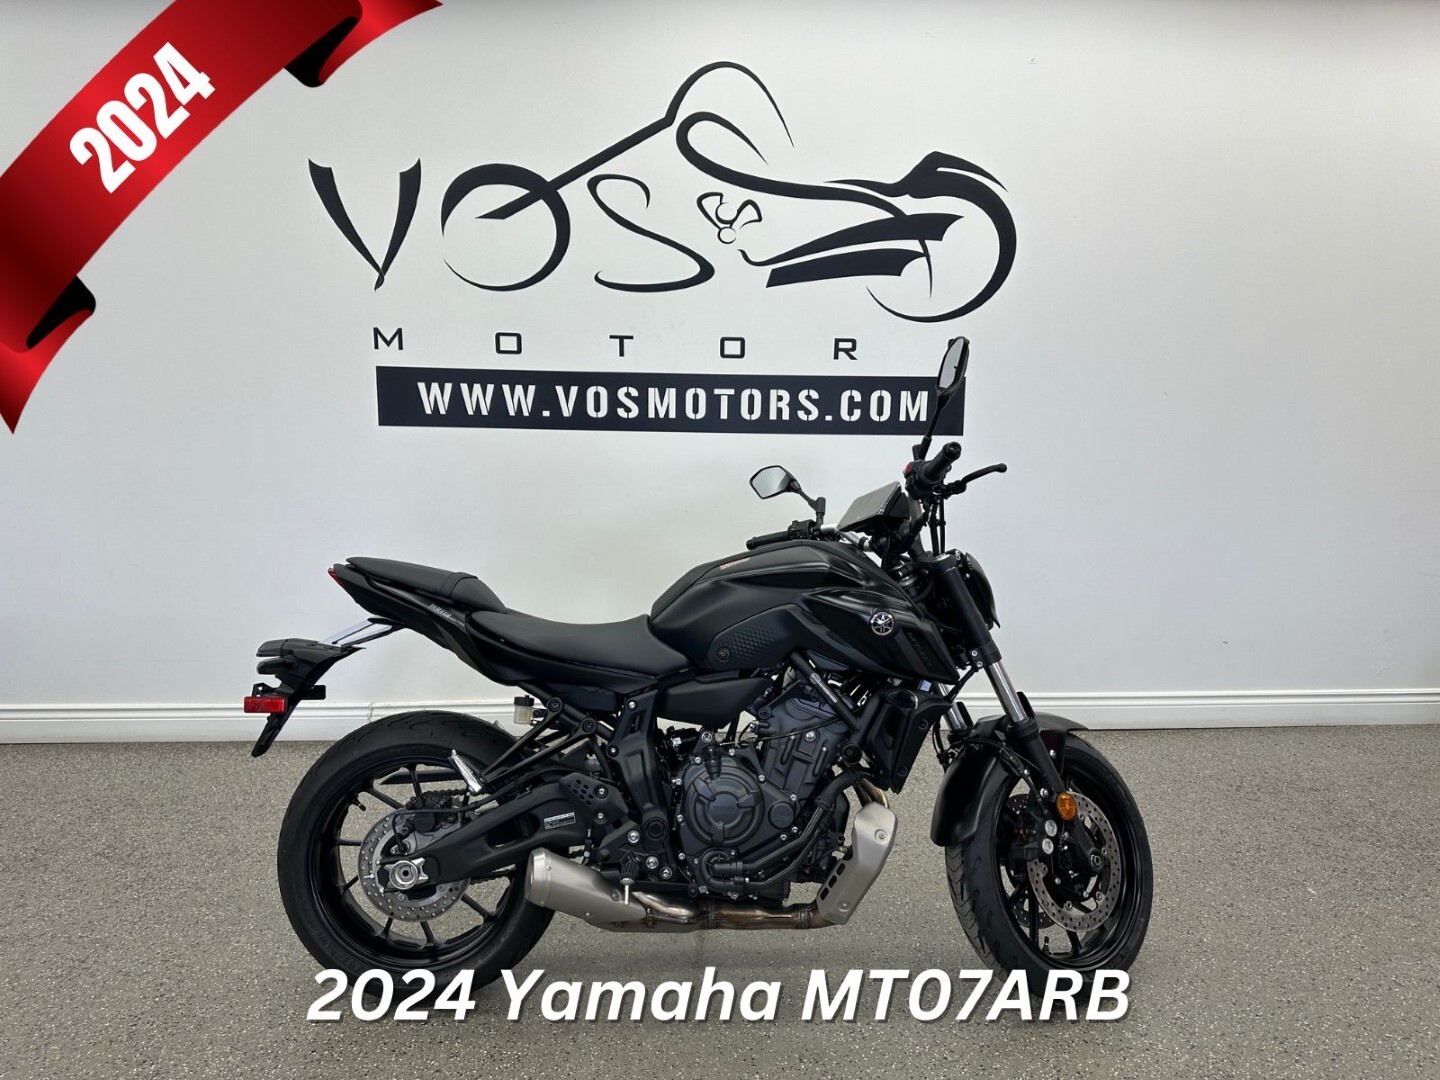 2024 Yamaha MT07ARB MT07ARB - V6016 - -No Payments for 1 Year**